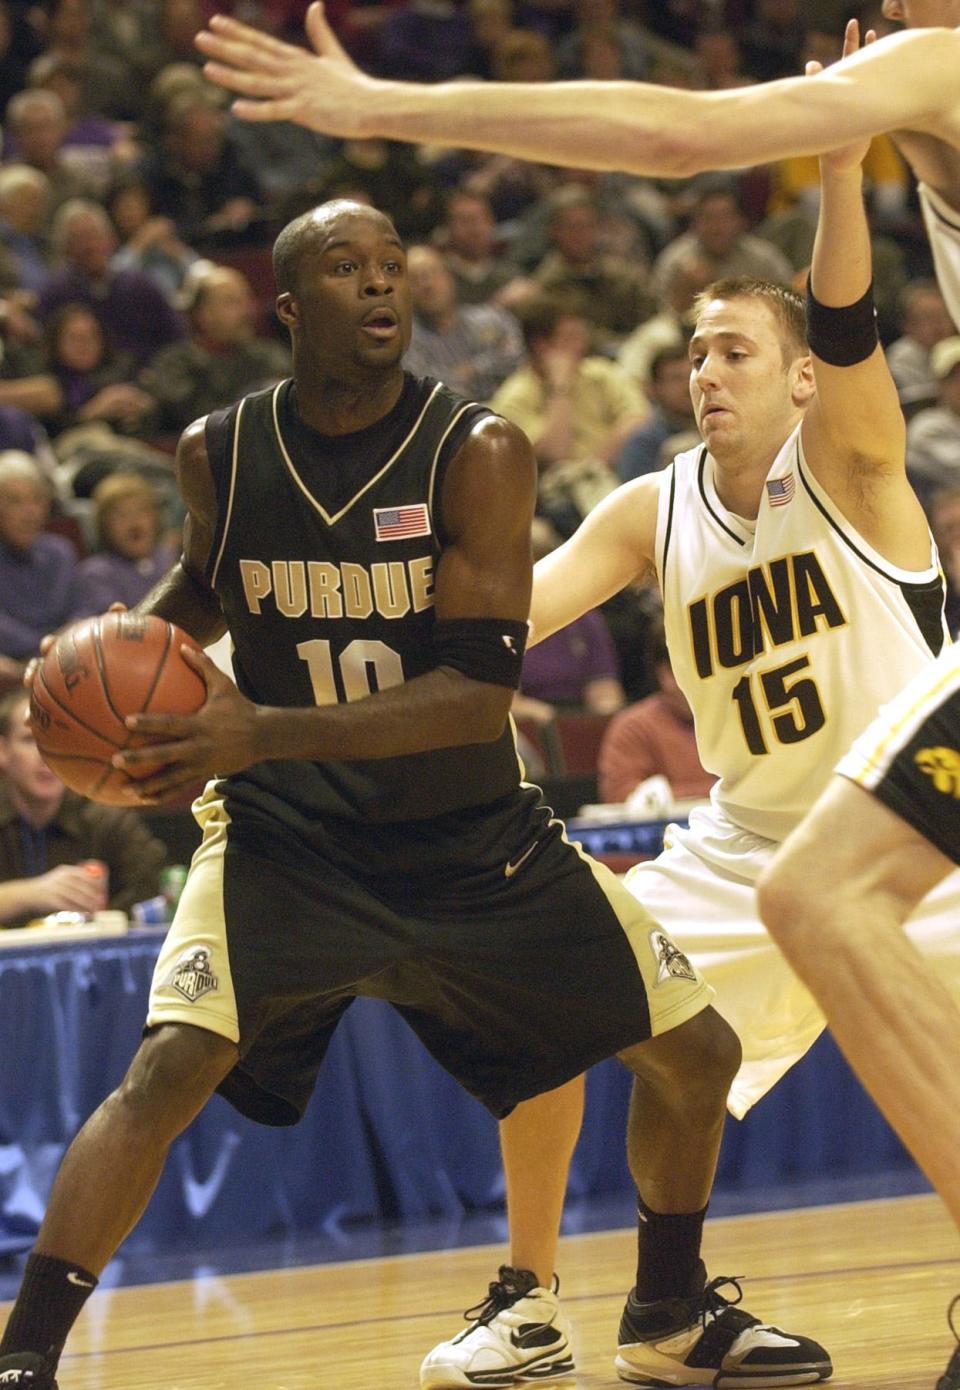 Purdue guard Brandon McKnight (10) attempts to find a player to pass to as Iowa guard Jack Brownlee (15) defends during first half action in the first round of the Big Ten Tournament Thursday March 10, 2005 in Chicago, Ill. Photo by Joe Raymond Sports Folder